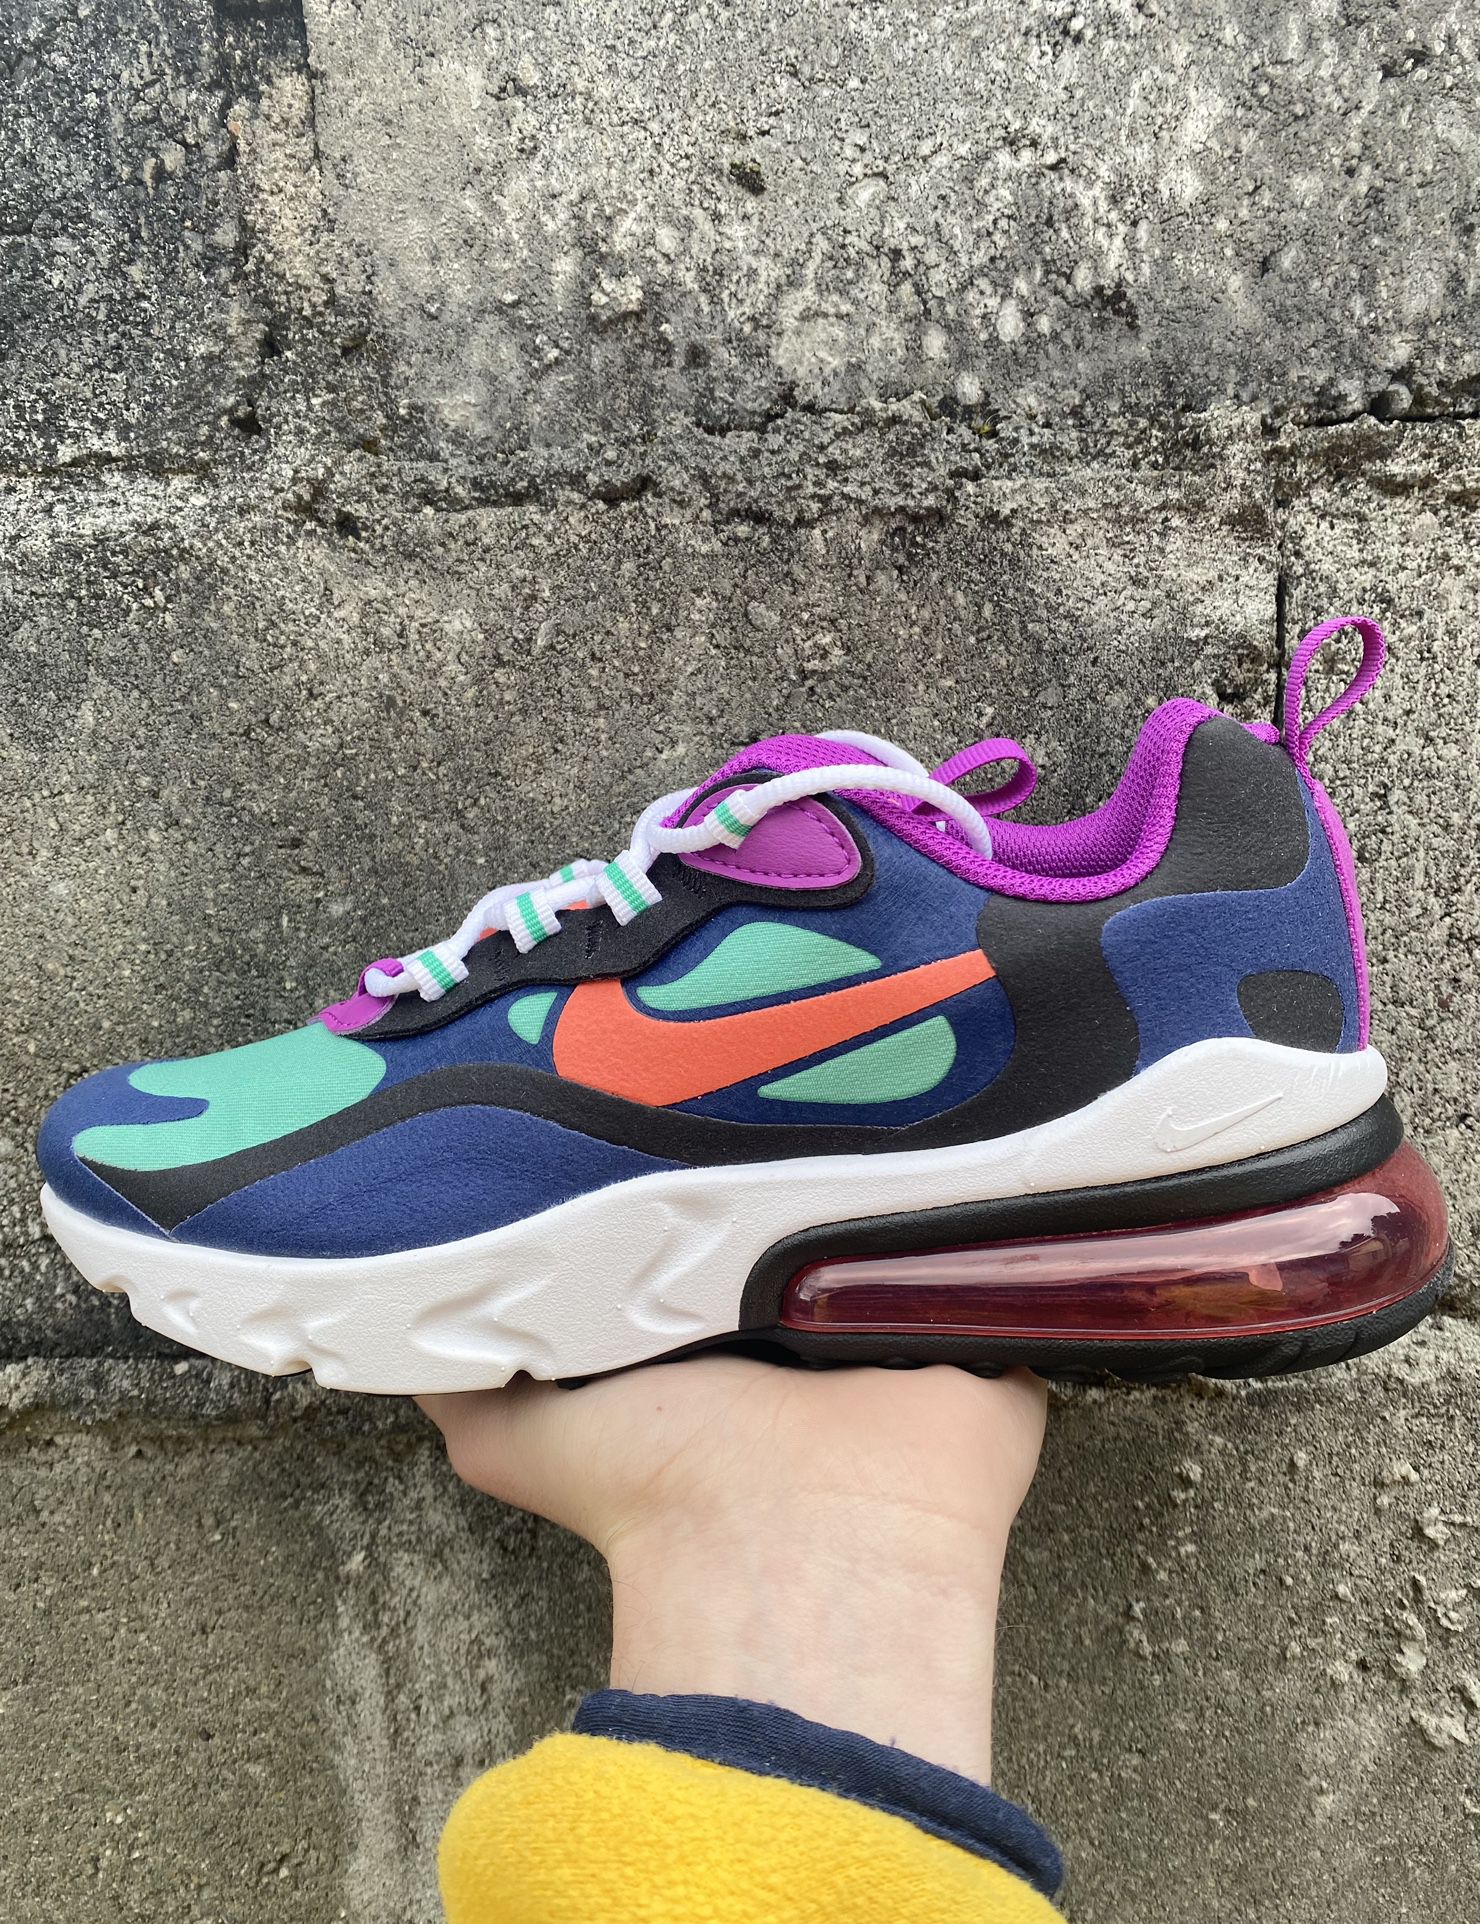 Nike Air Max 270 React Blue GS 5.5Y for Sale in Portland, OR -